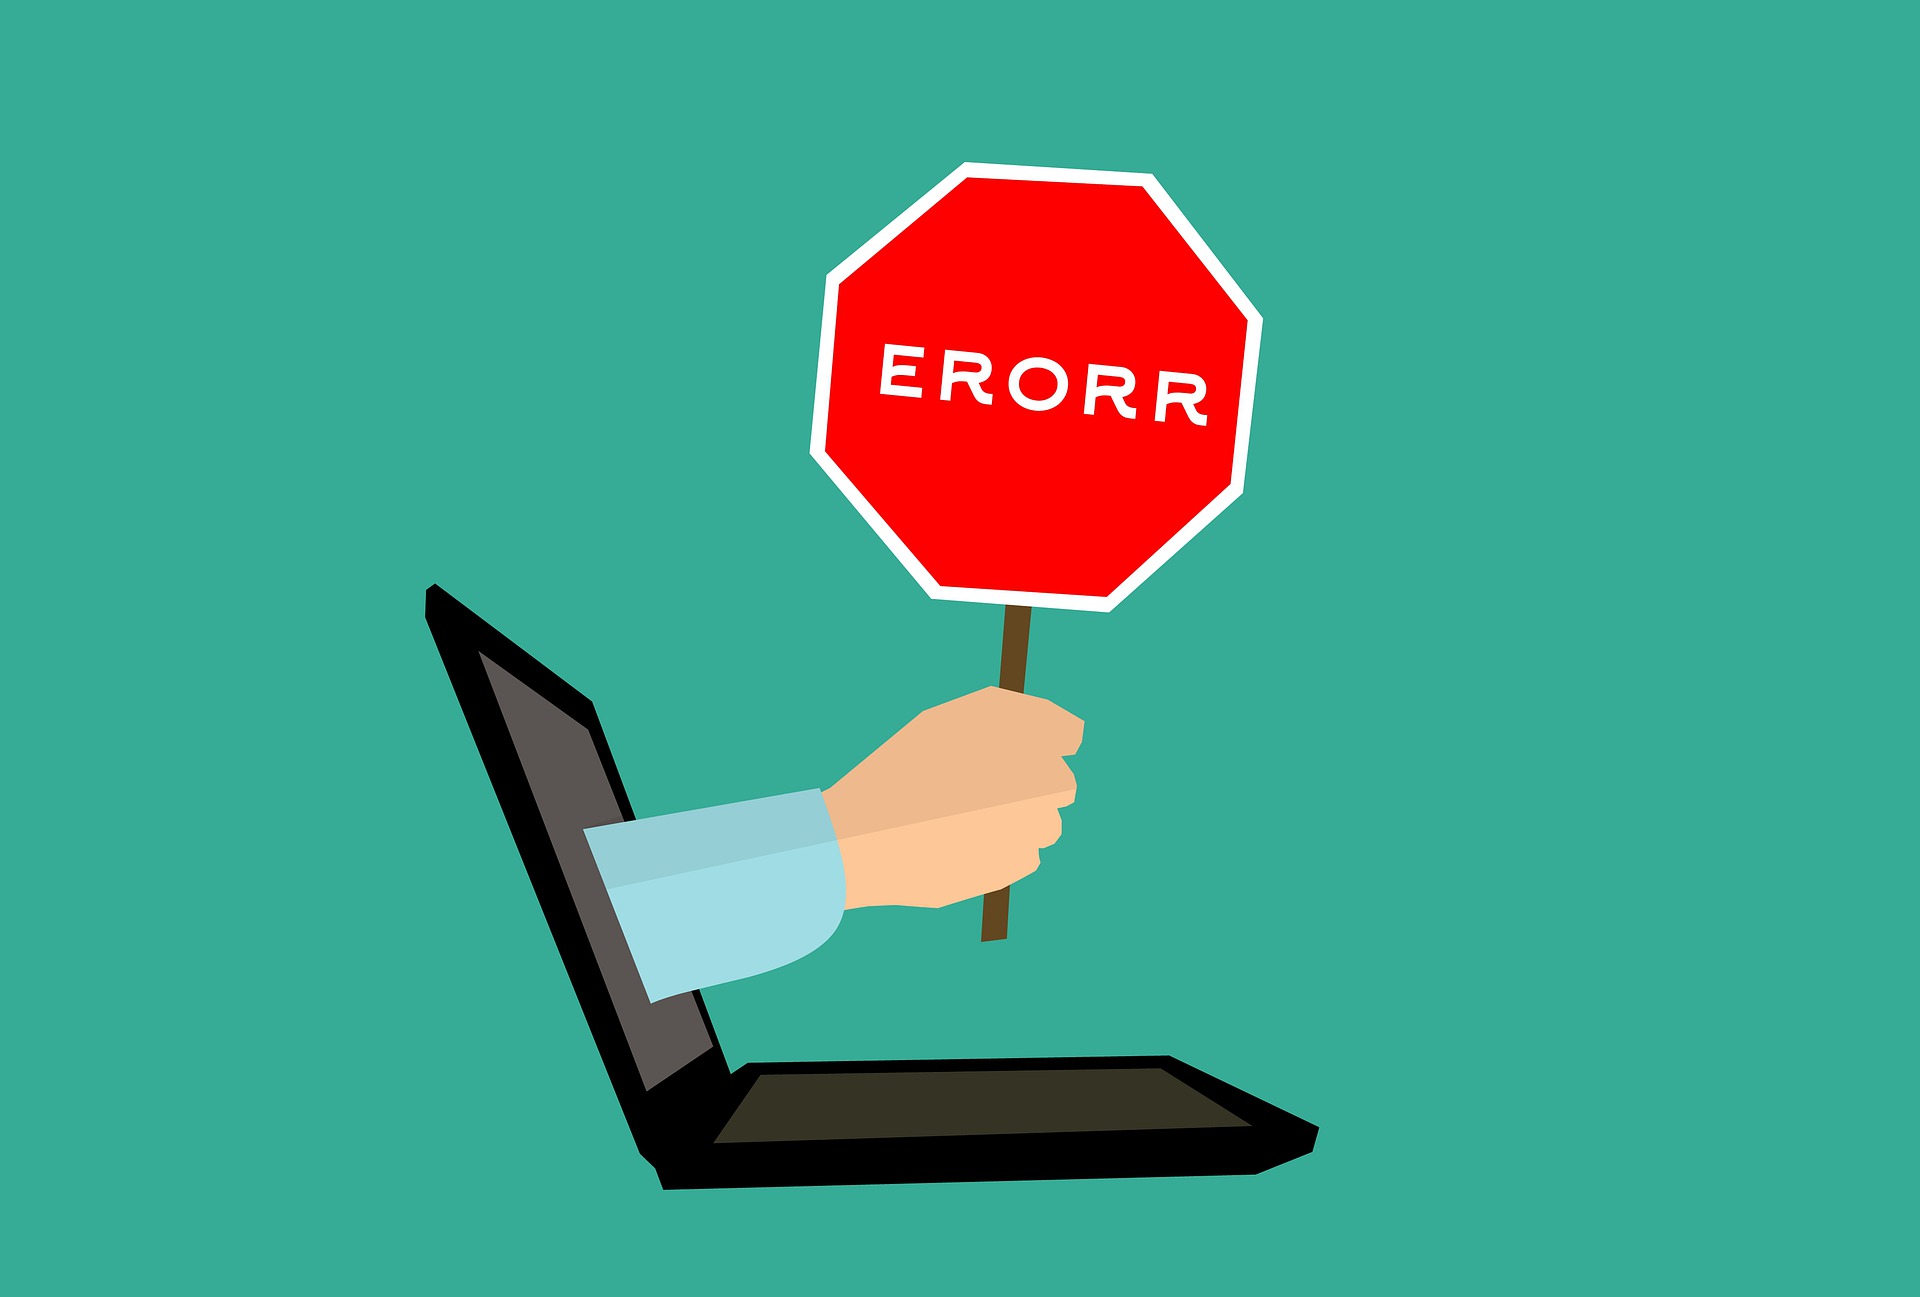 A hand holding a stop sign with "Error" on it that is coming out of a laptop screen